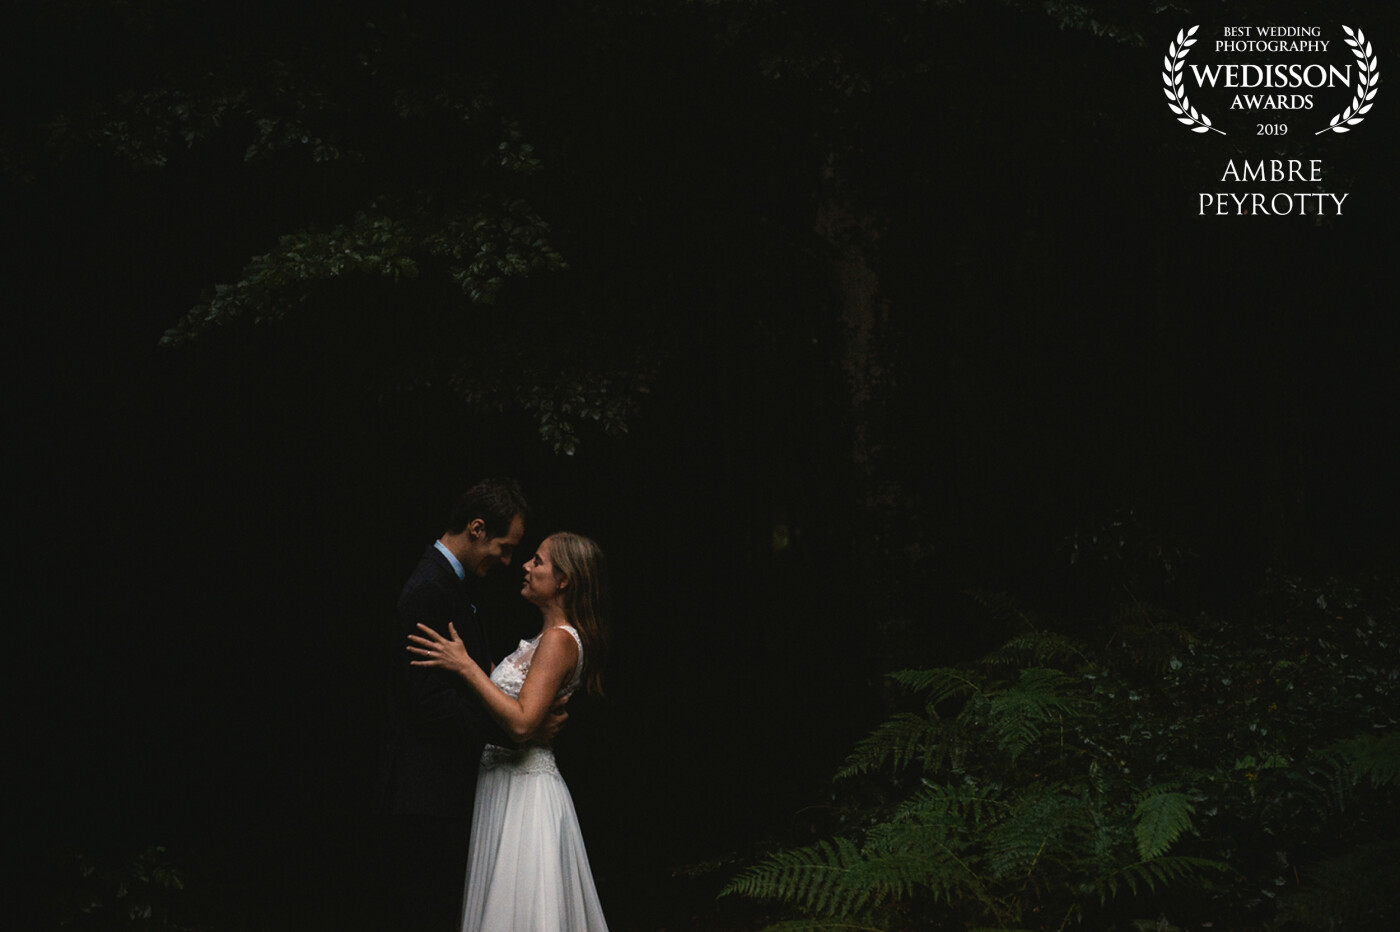 This was taken during a slow moment in the forest with this amazing couple. We listened to the soft rain on the tree branches and simply breathed together in the darkness.